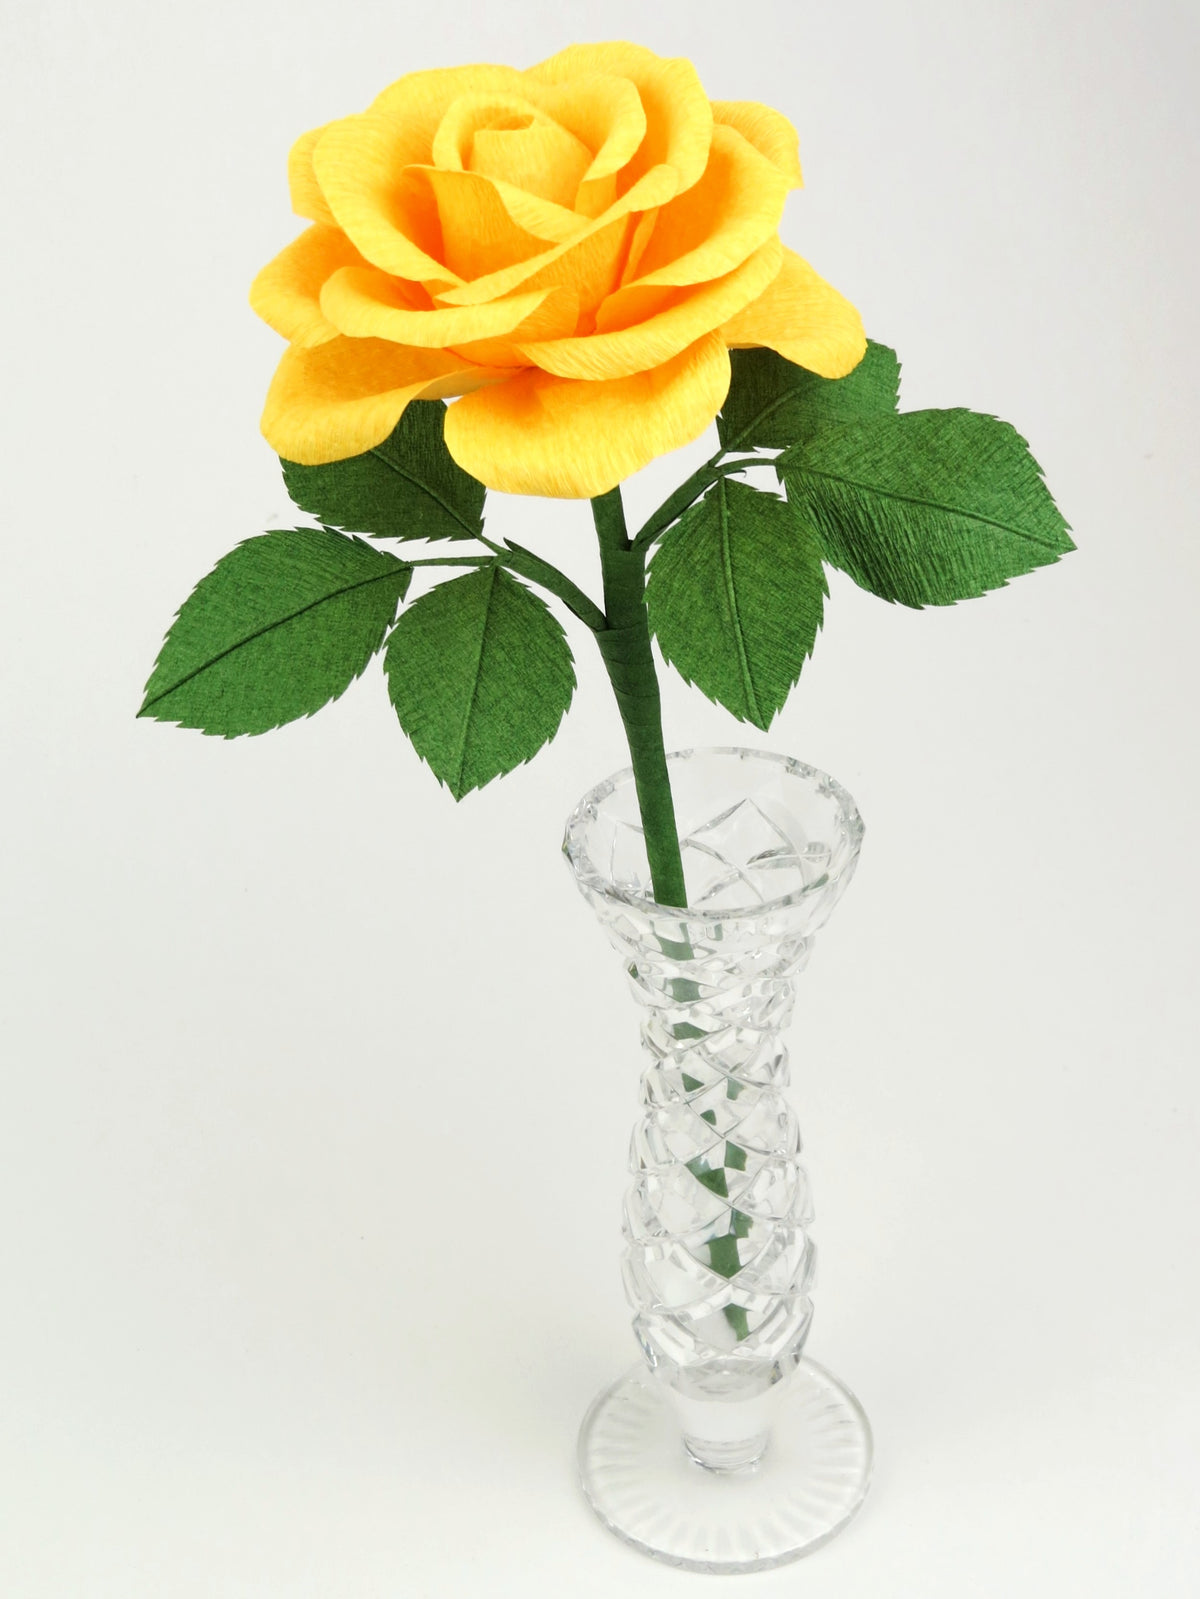 Yellow paper rose with six leaves standing in a narrow glass vase against a white background